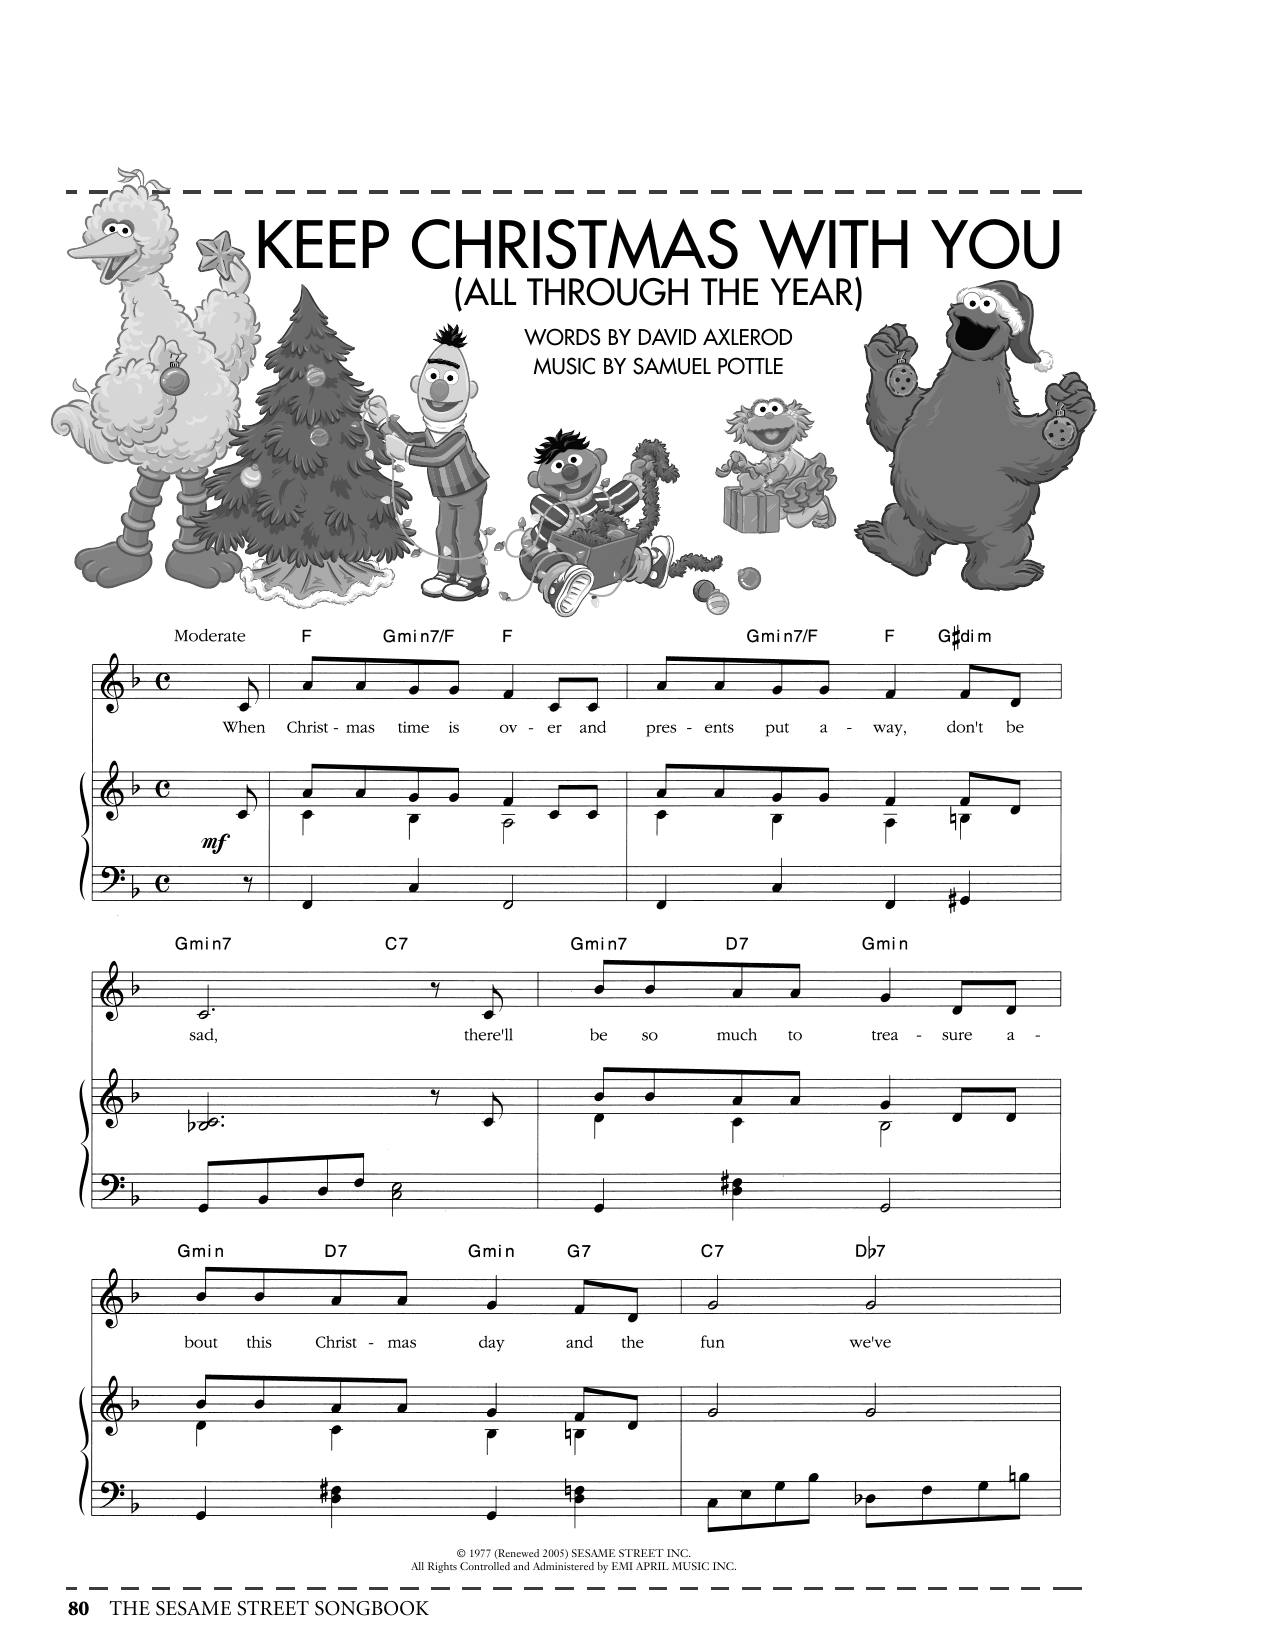 David Axlerod Keep Christmas With You (All Through The Year) (from Sesame Street) sheet music notes printable PDF score